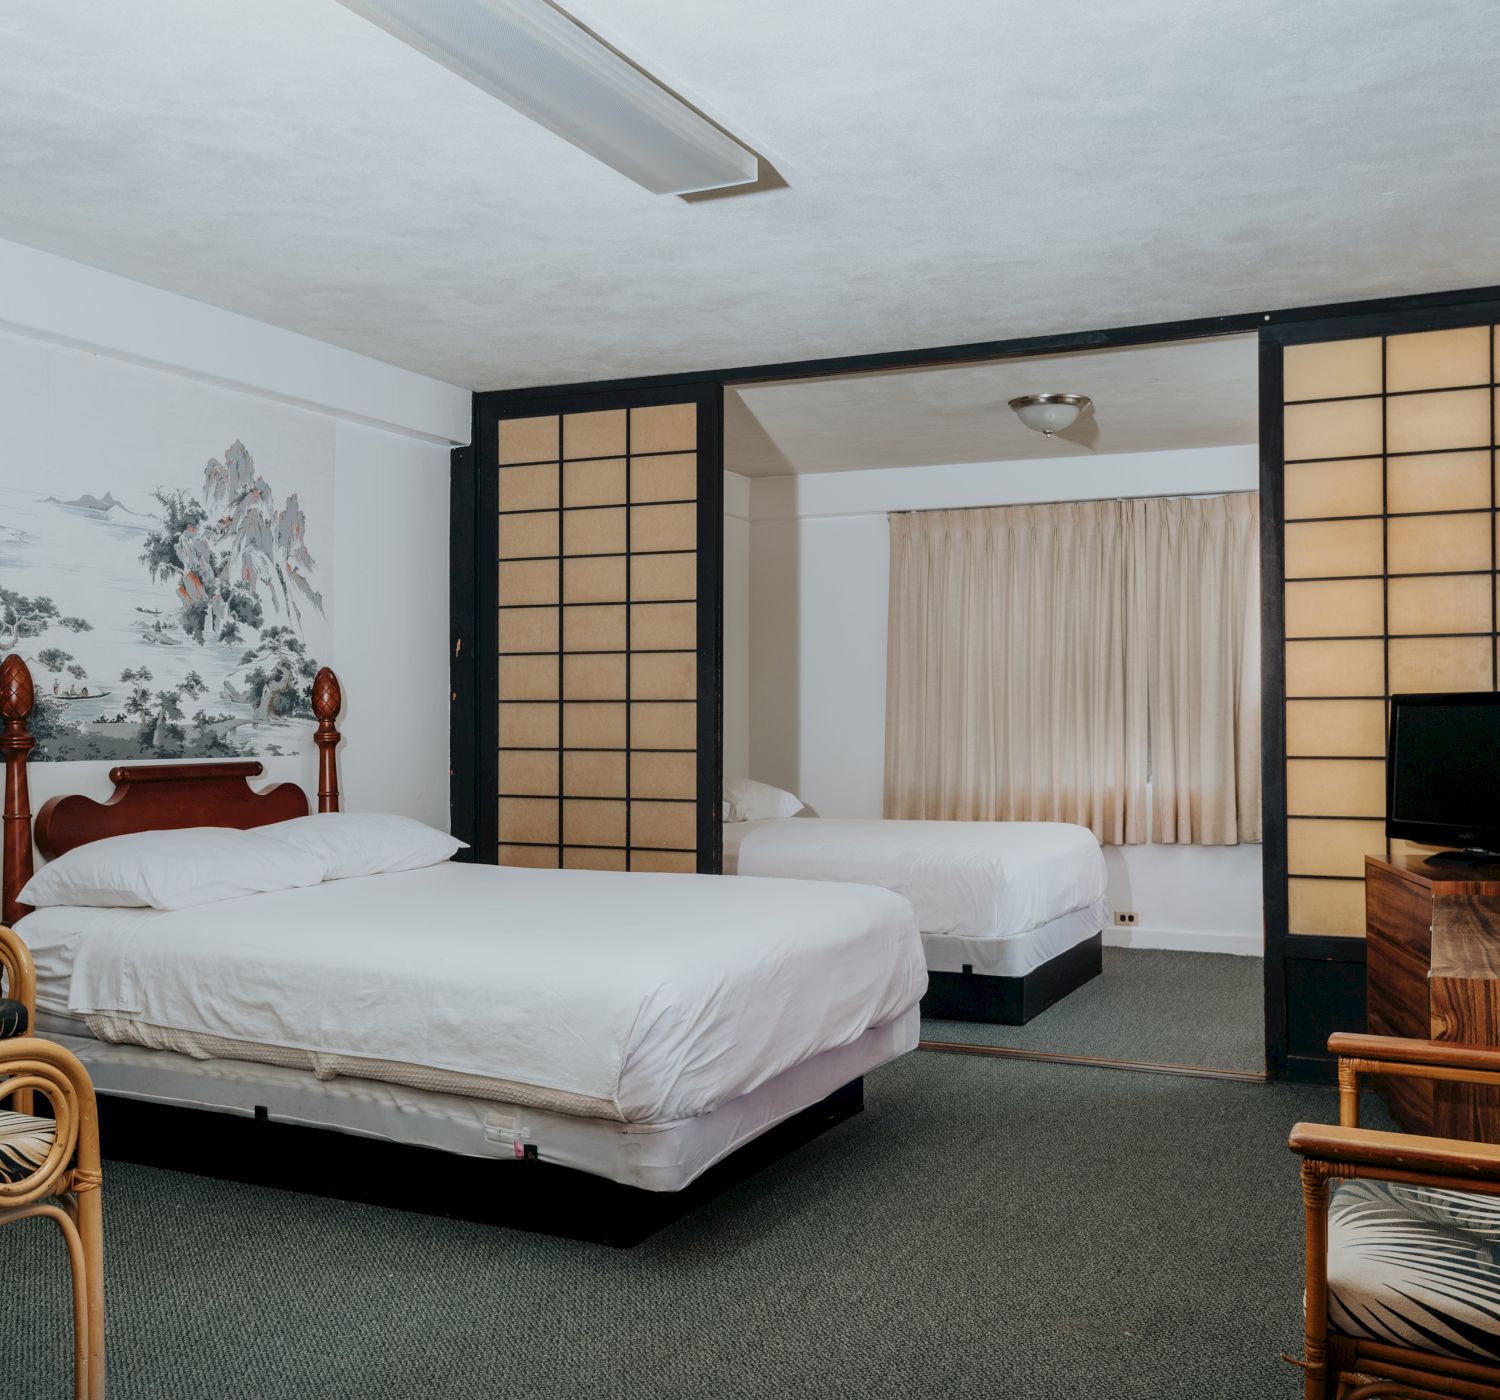 The image shows a hotel room with two beds, wooden furniture, chairs, a small TV, and a partition wall with a painting. The room appears cozy.